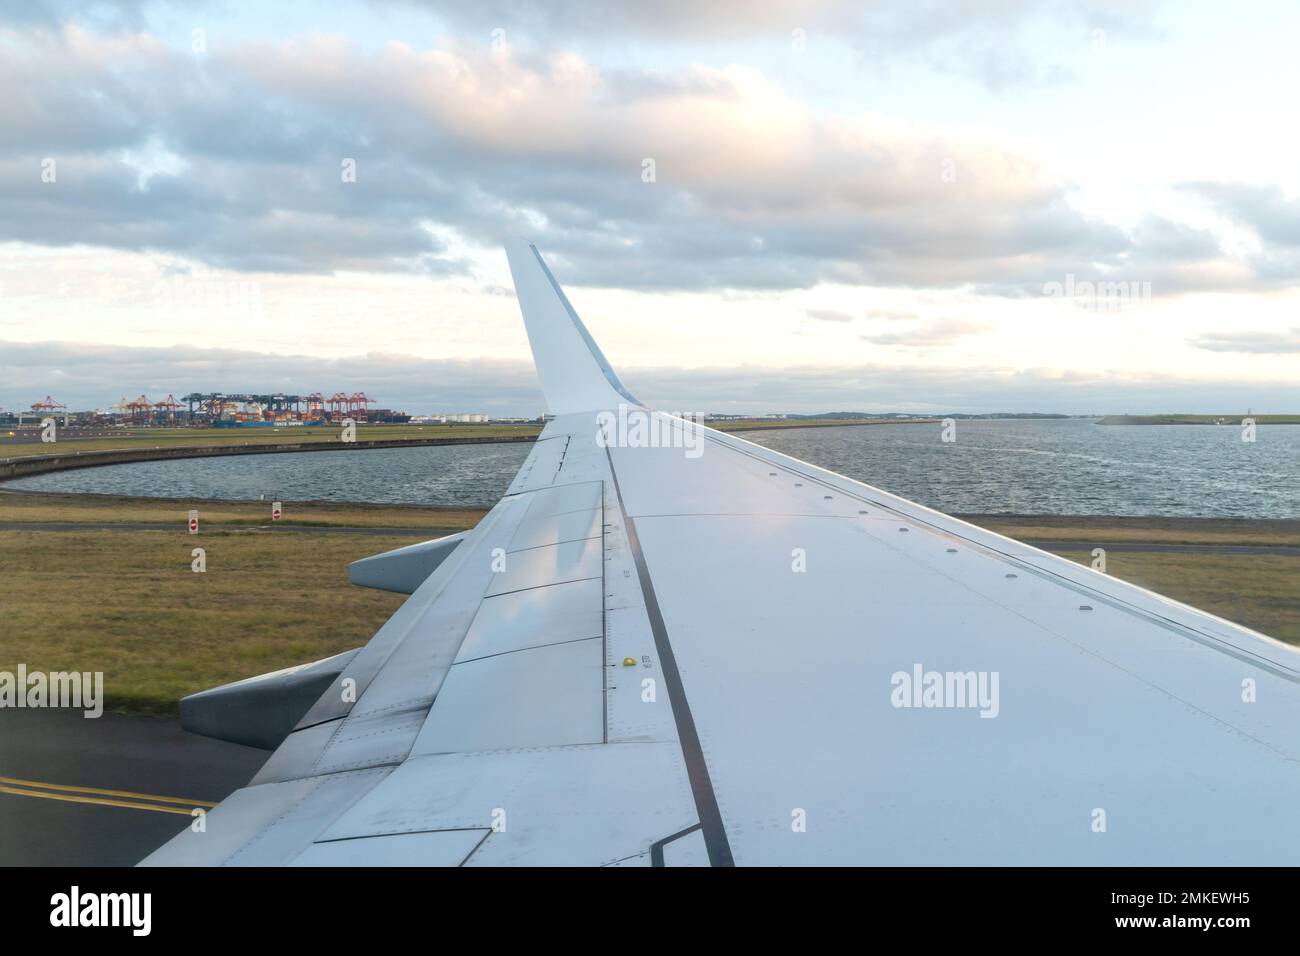 View of a Landing Airplane Wing from Window Seat Stock Photo